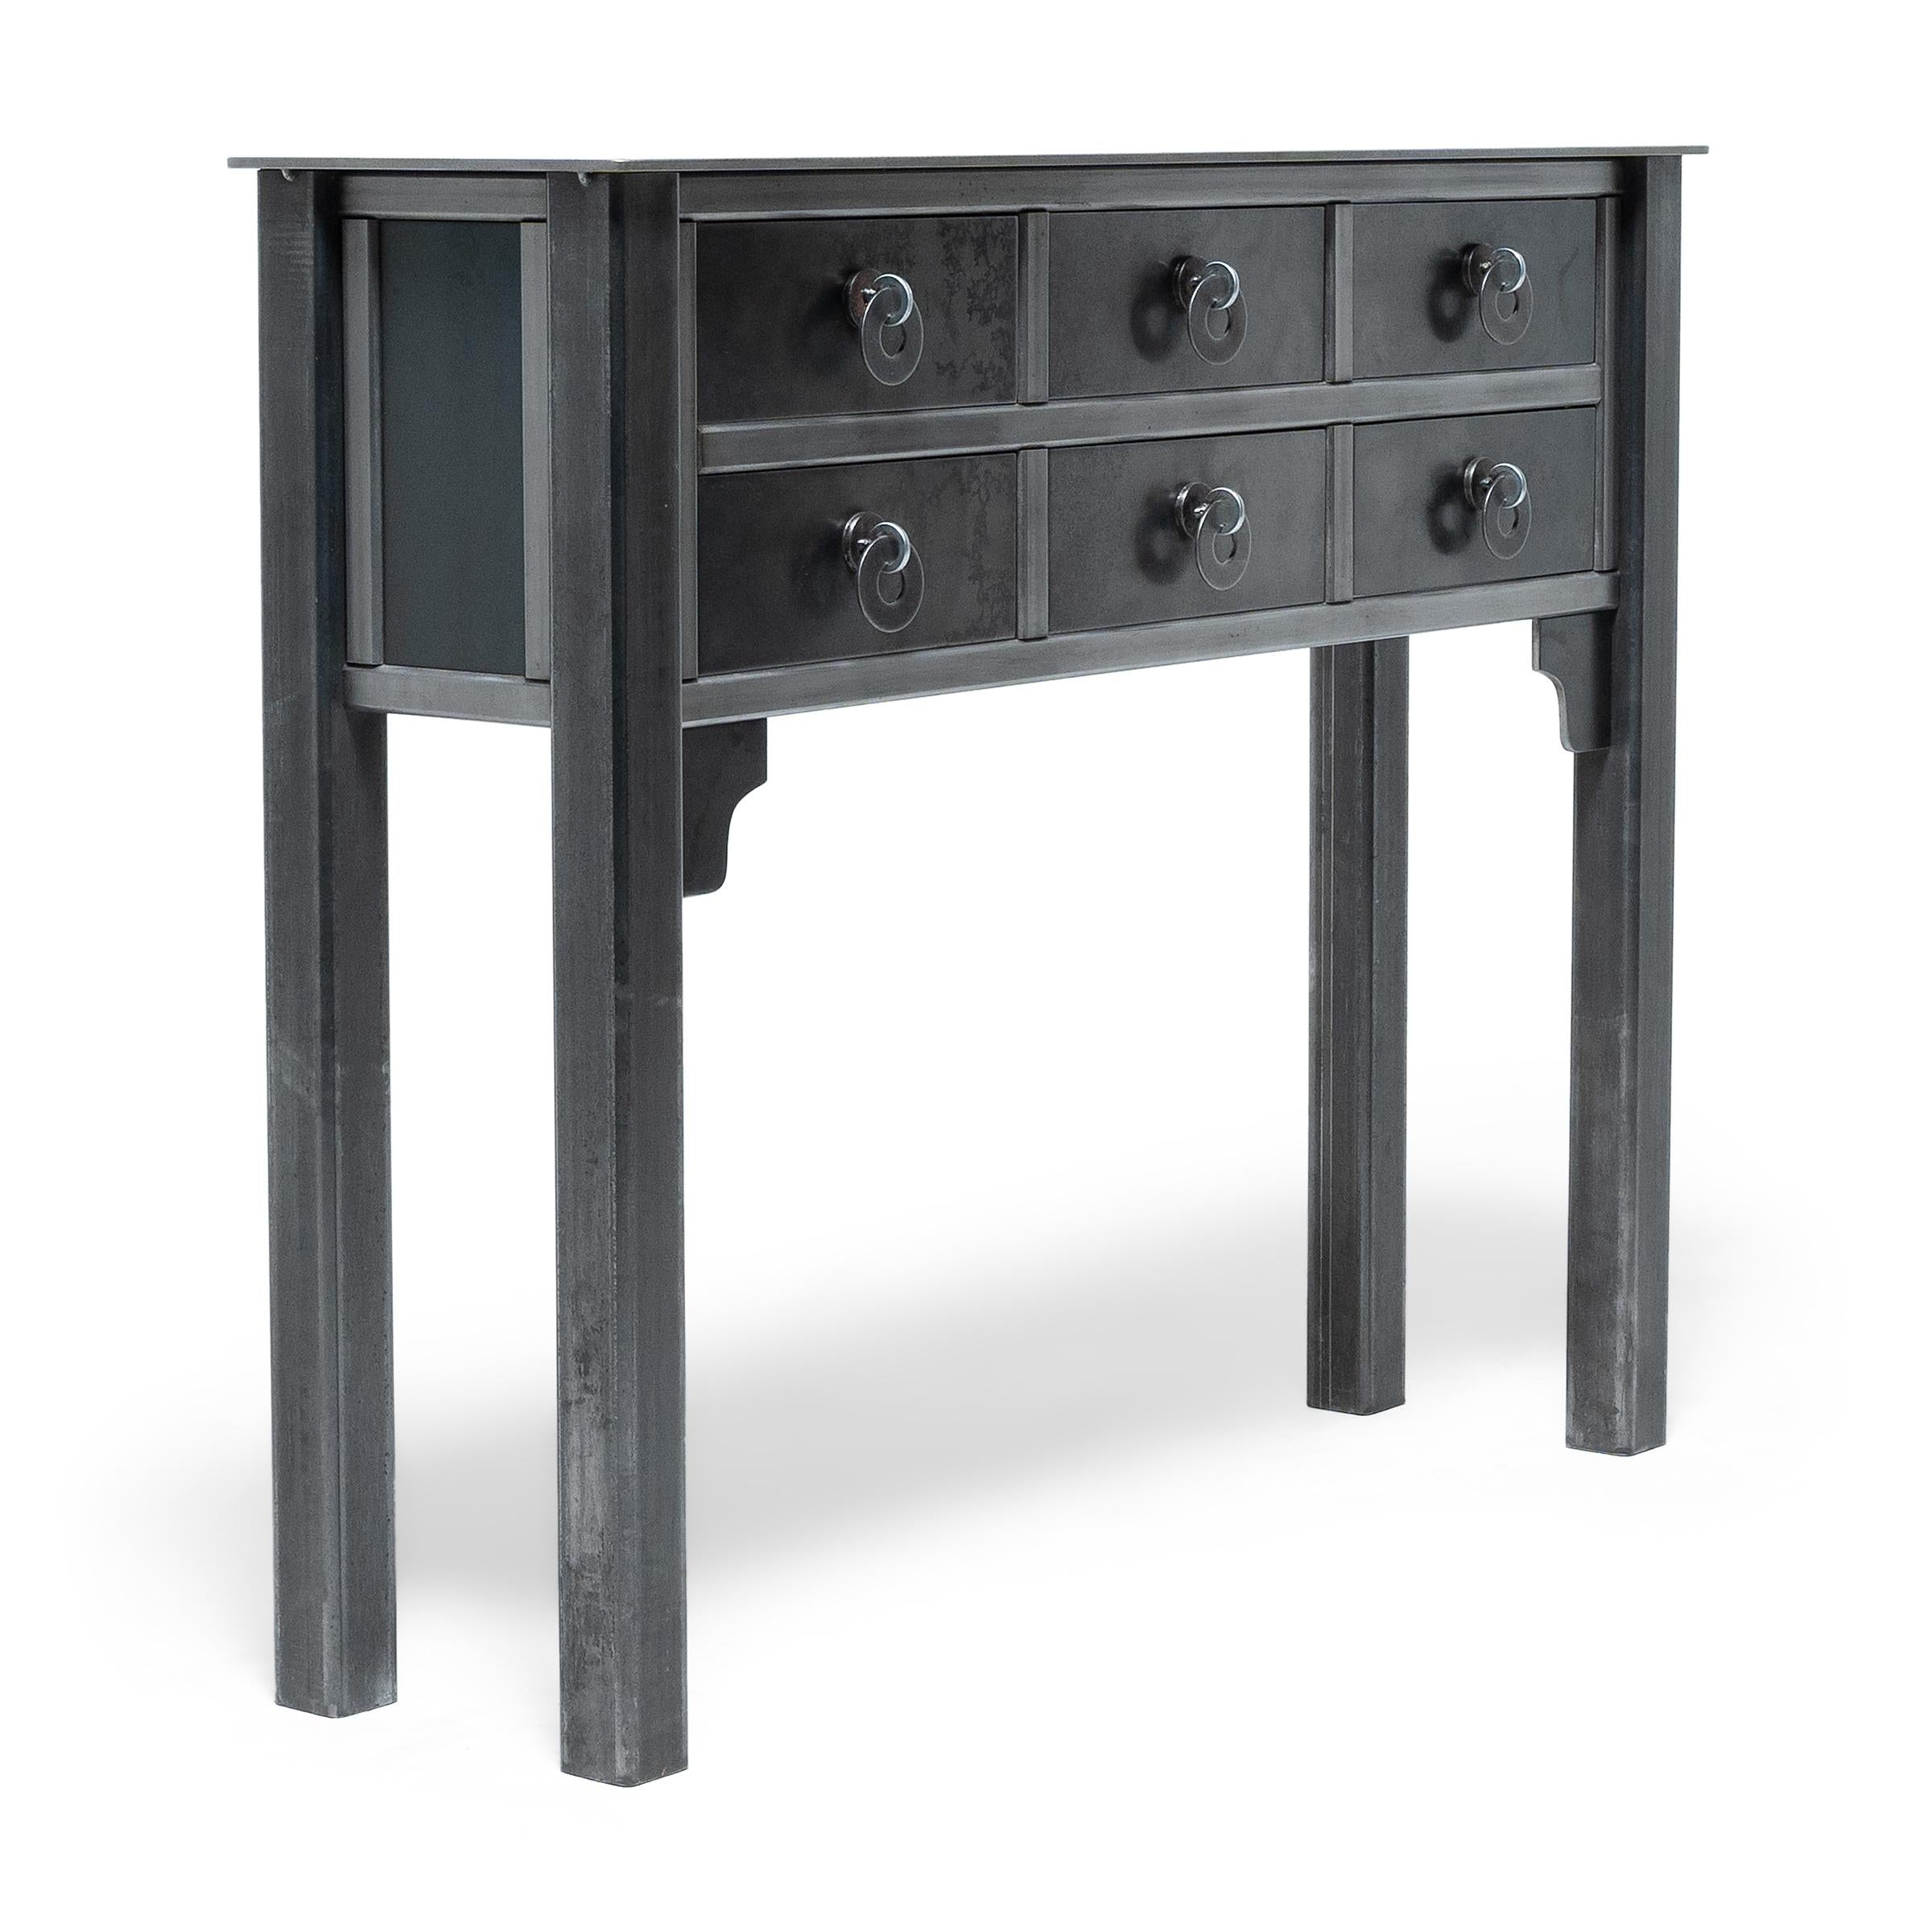 Created exclusively for Pagoda Red, the Ming Steel Collection by artist Jim Rose forges a connection between Shaker minimalism and the simplified lines of Ming-dynasty furniture. The culmination of years of studying the vernacular history of